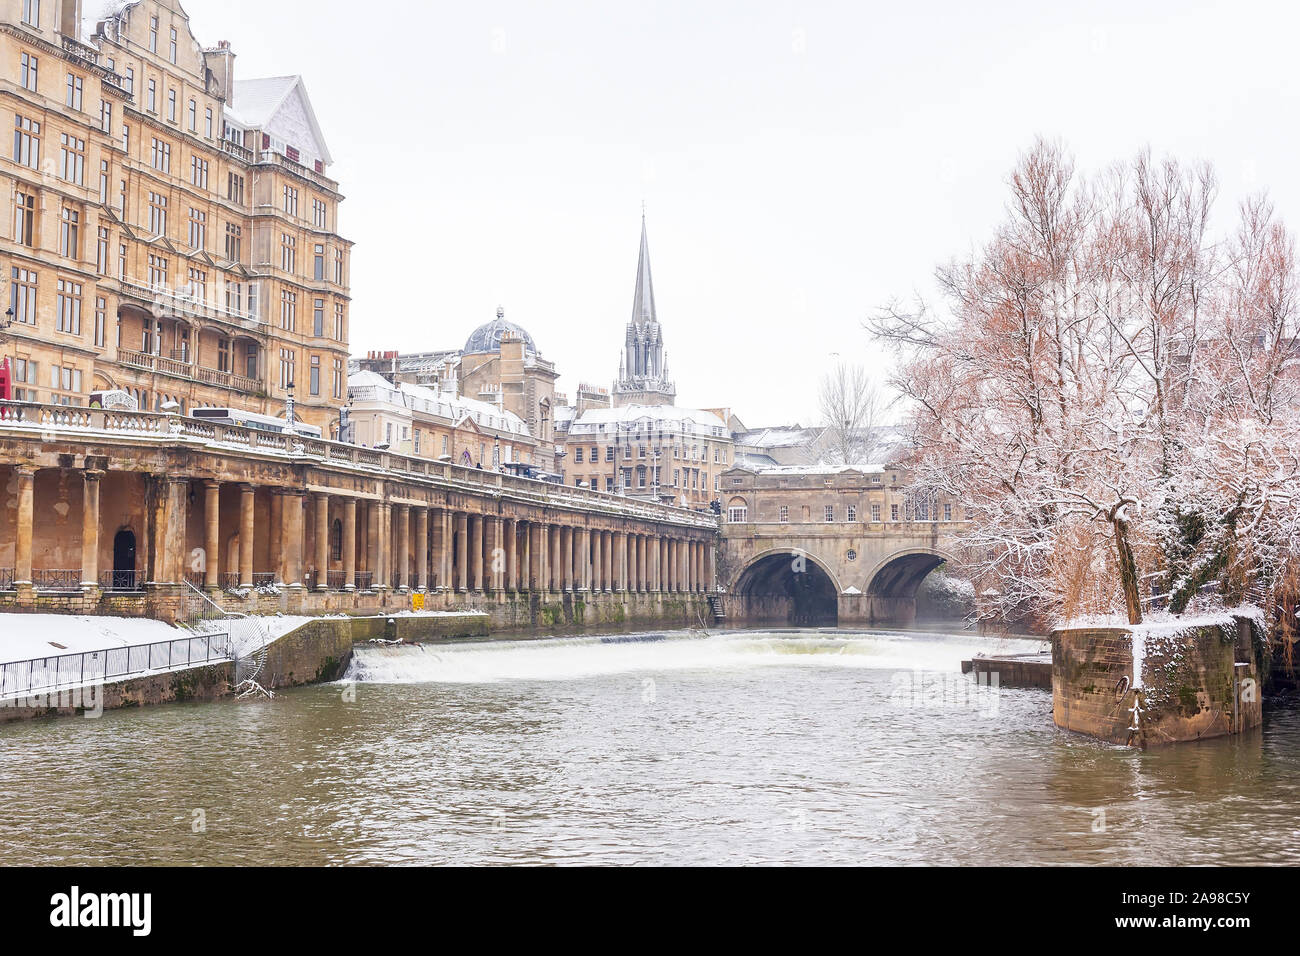 Great Pulteney Bridge, Pulteney Weir and the River Avon on a  snowy winter's day in January Stock Photo